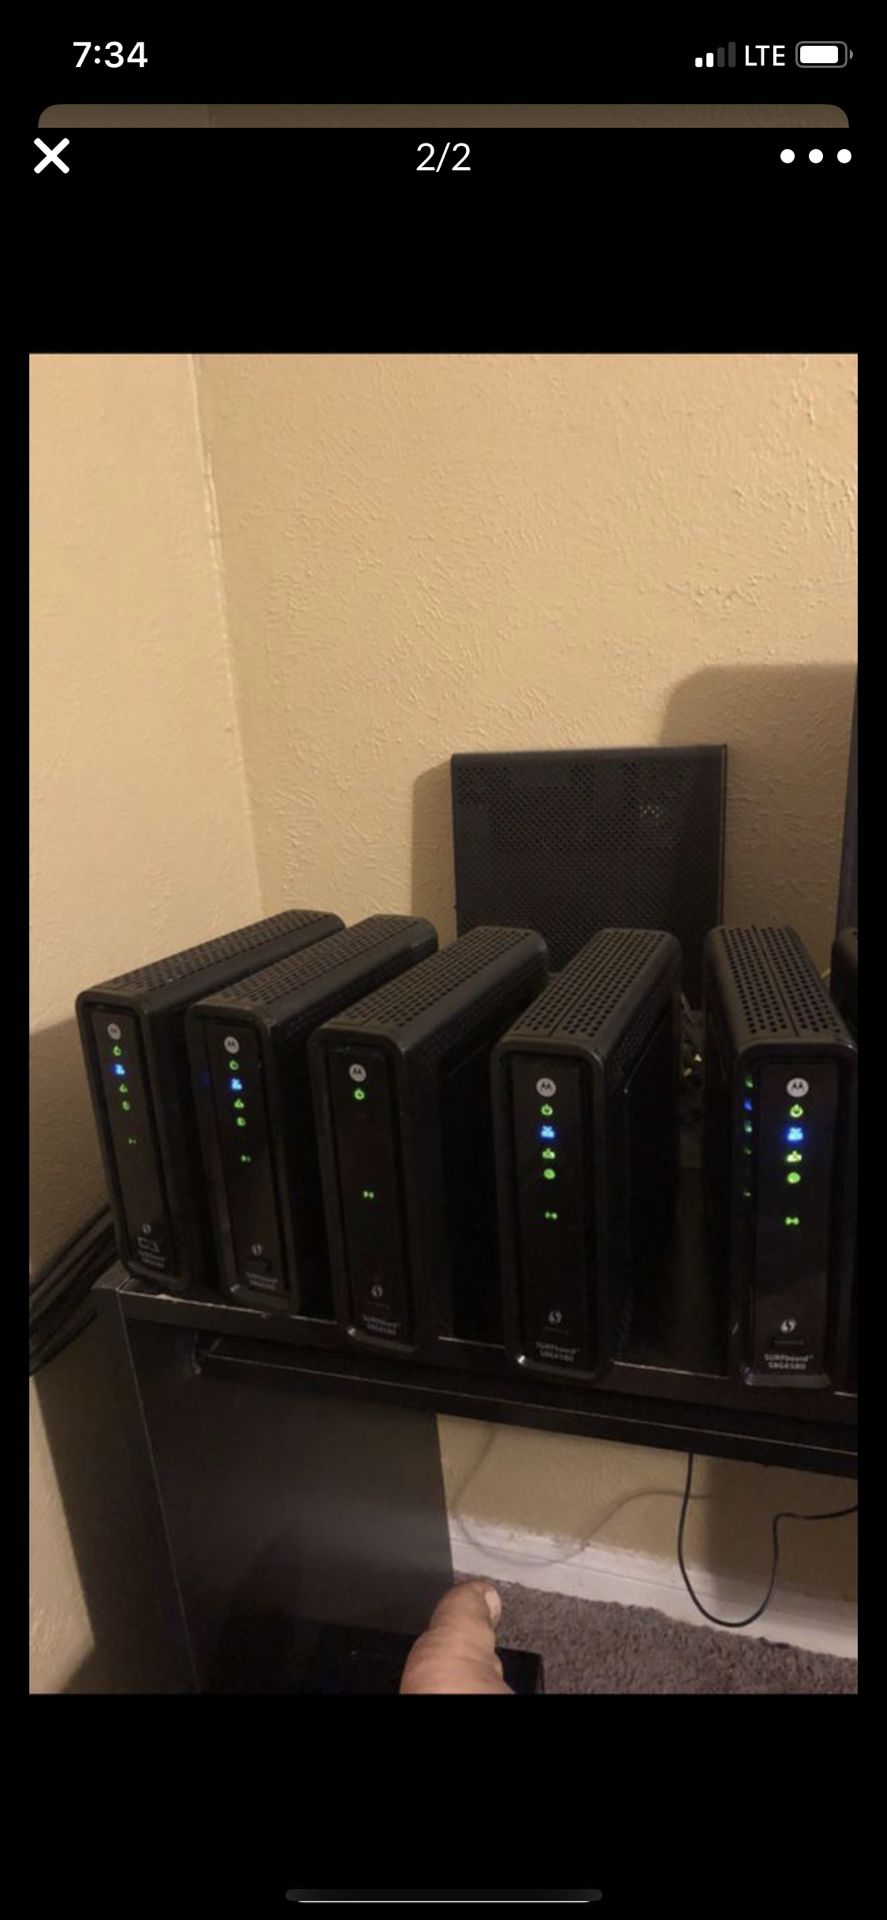 Cable modem WiFi